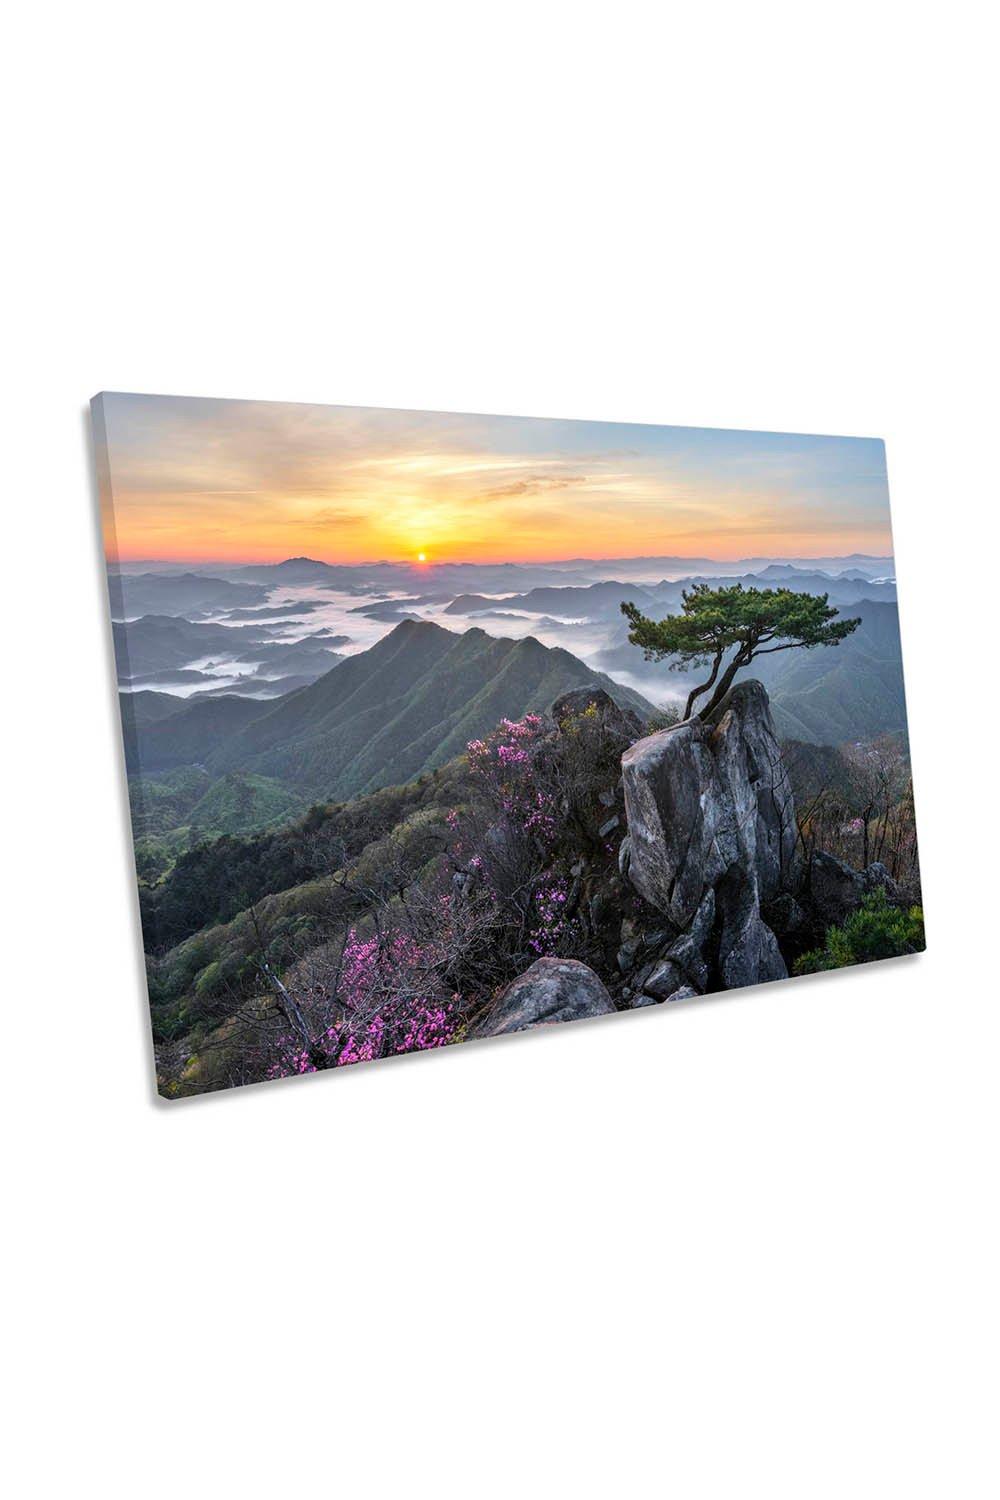 Pine Tree at Mountain Top Sunset Canvas Wall Art Picture Print